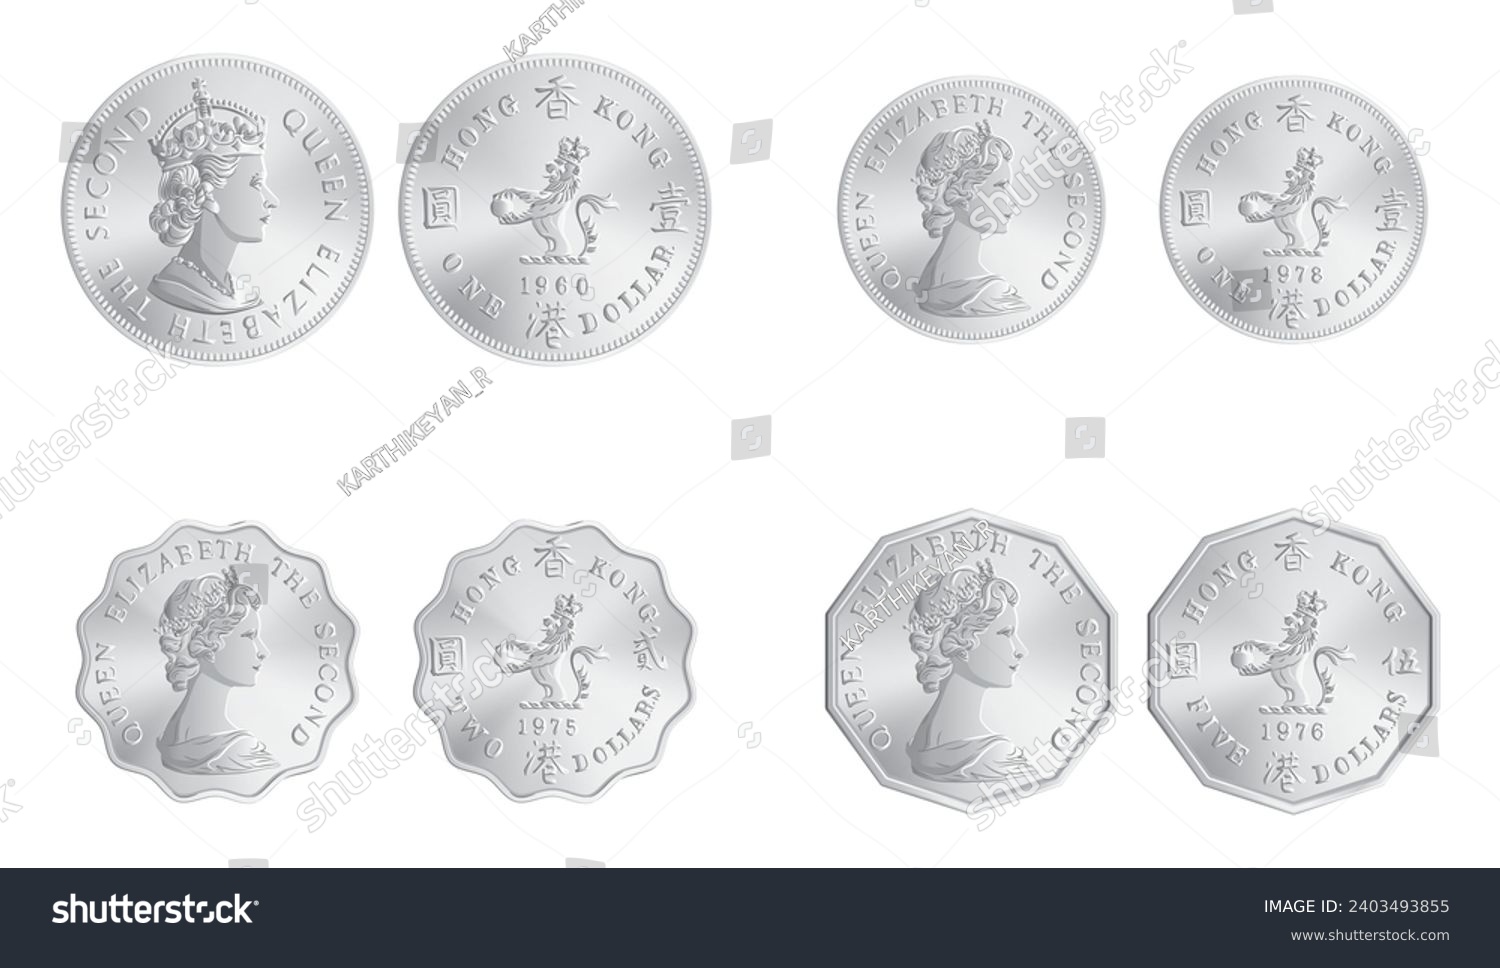 SVG of Obverse and reverse of 1970s Hong Kong Elizabeth One dollar, Two dollar, Five dollar coins isolated on white background in vector illustration svg